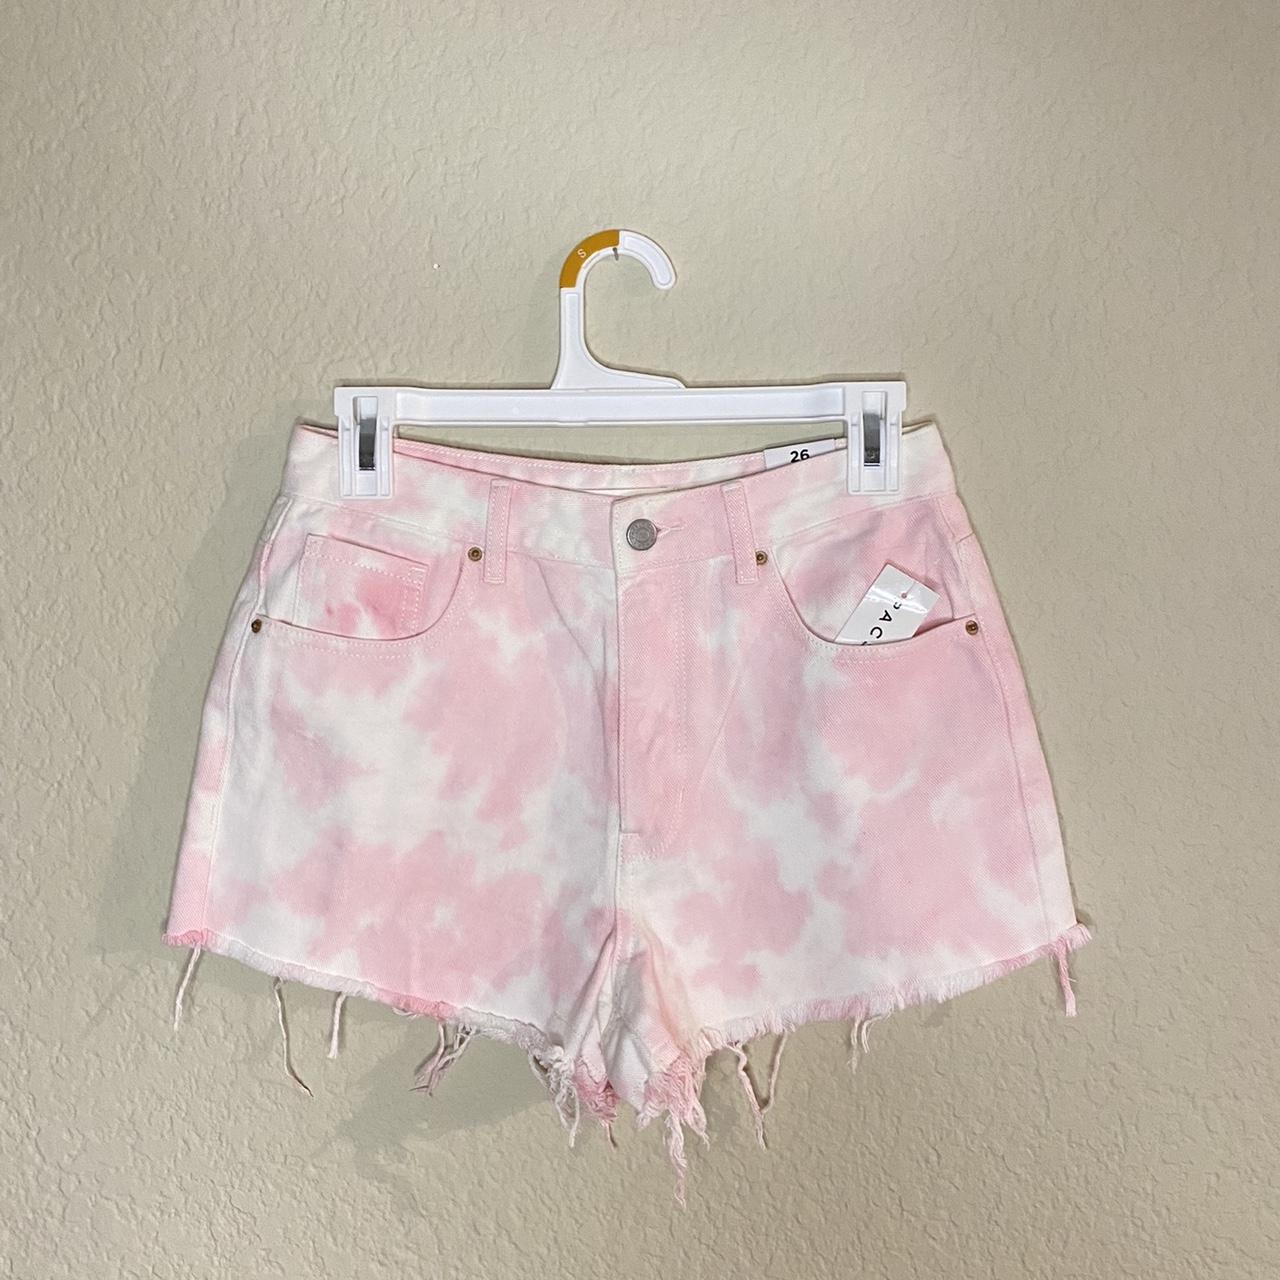 PacSun Women's Pink and White Shorts